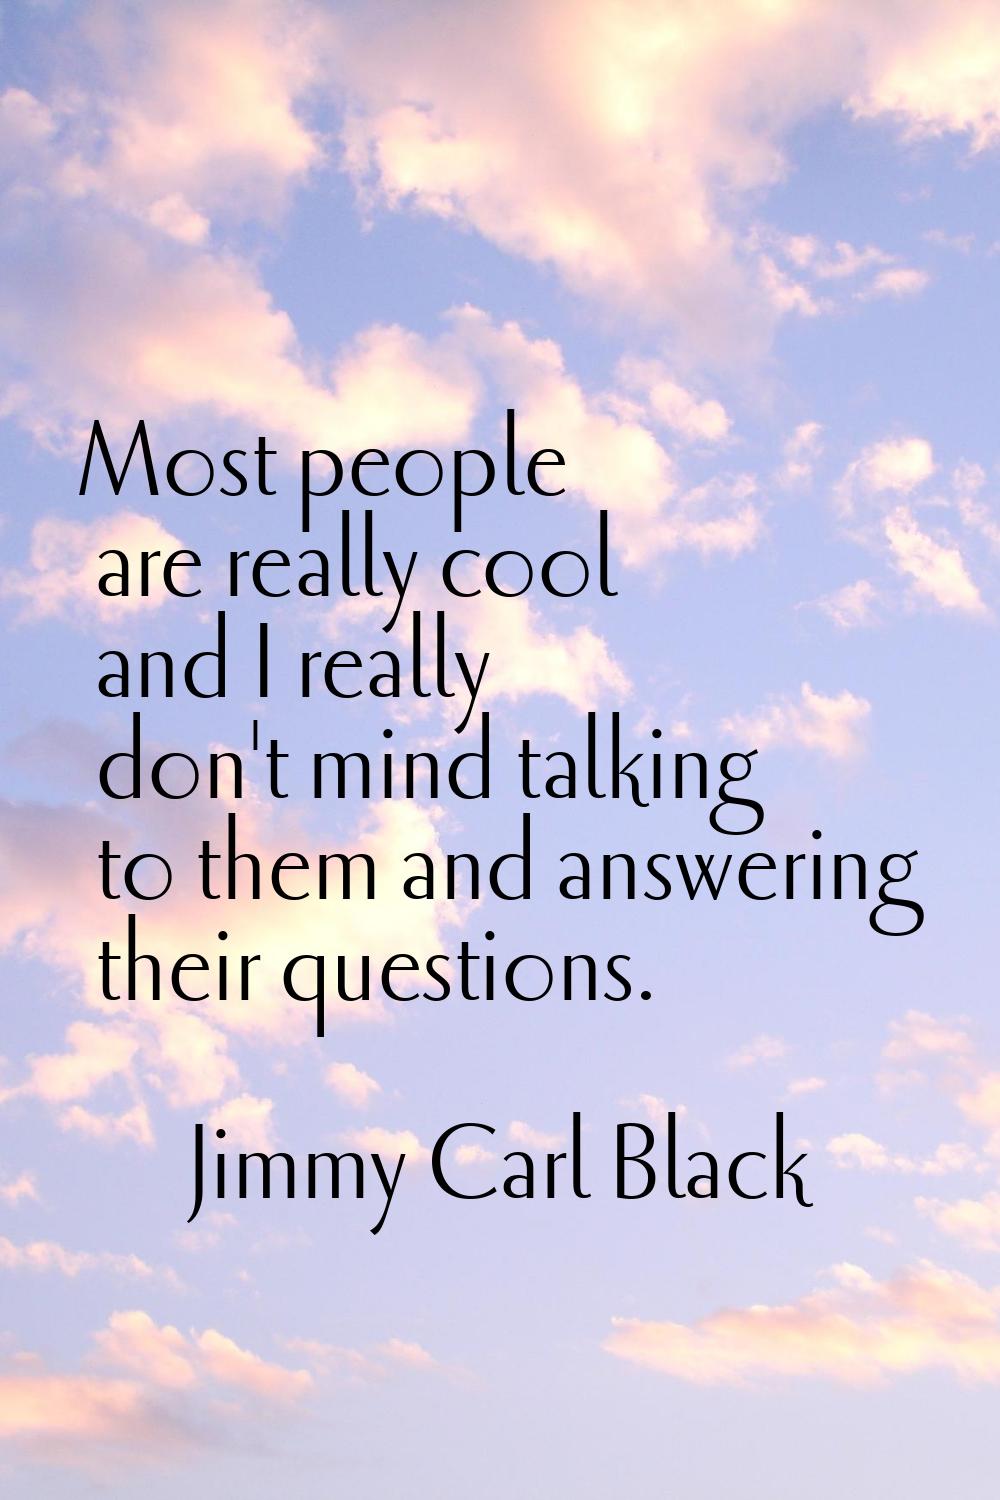 Most people are really cool and I really don't mind talking to them and answering their questions.